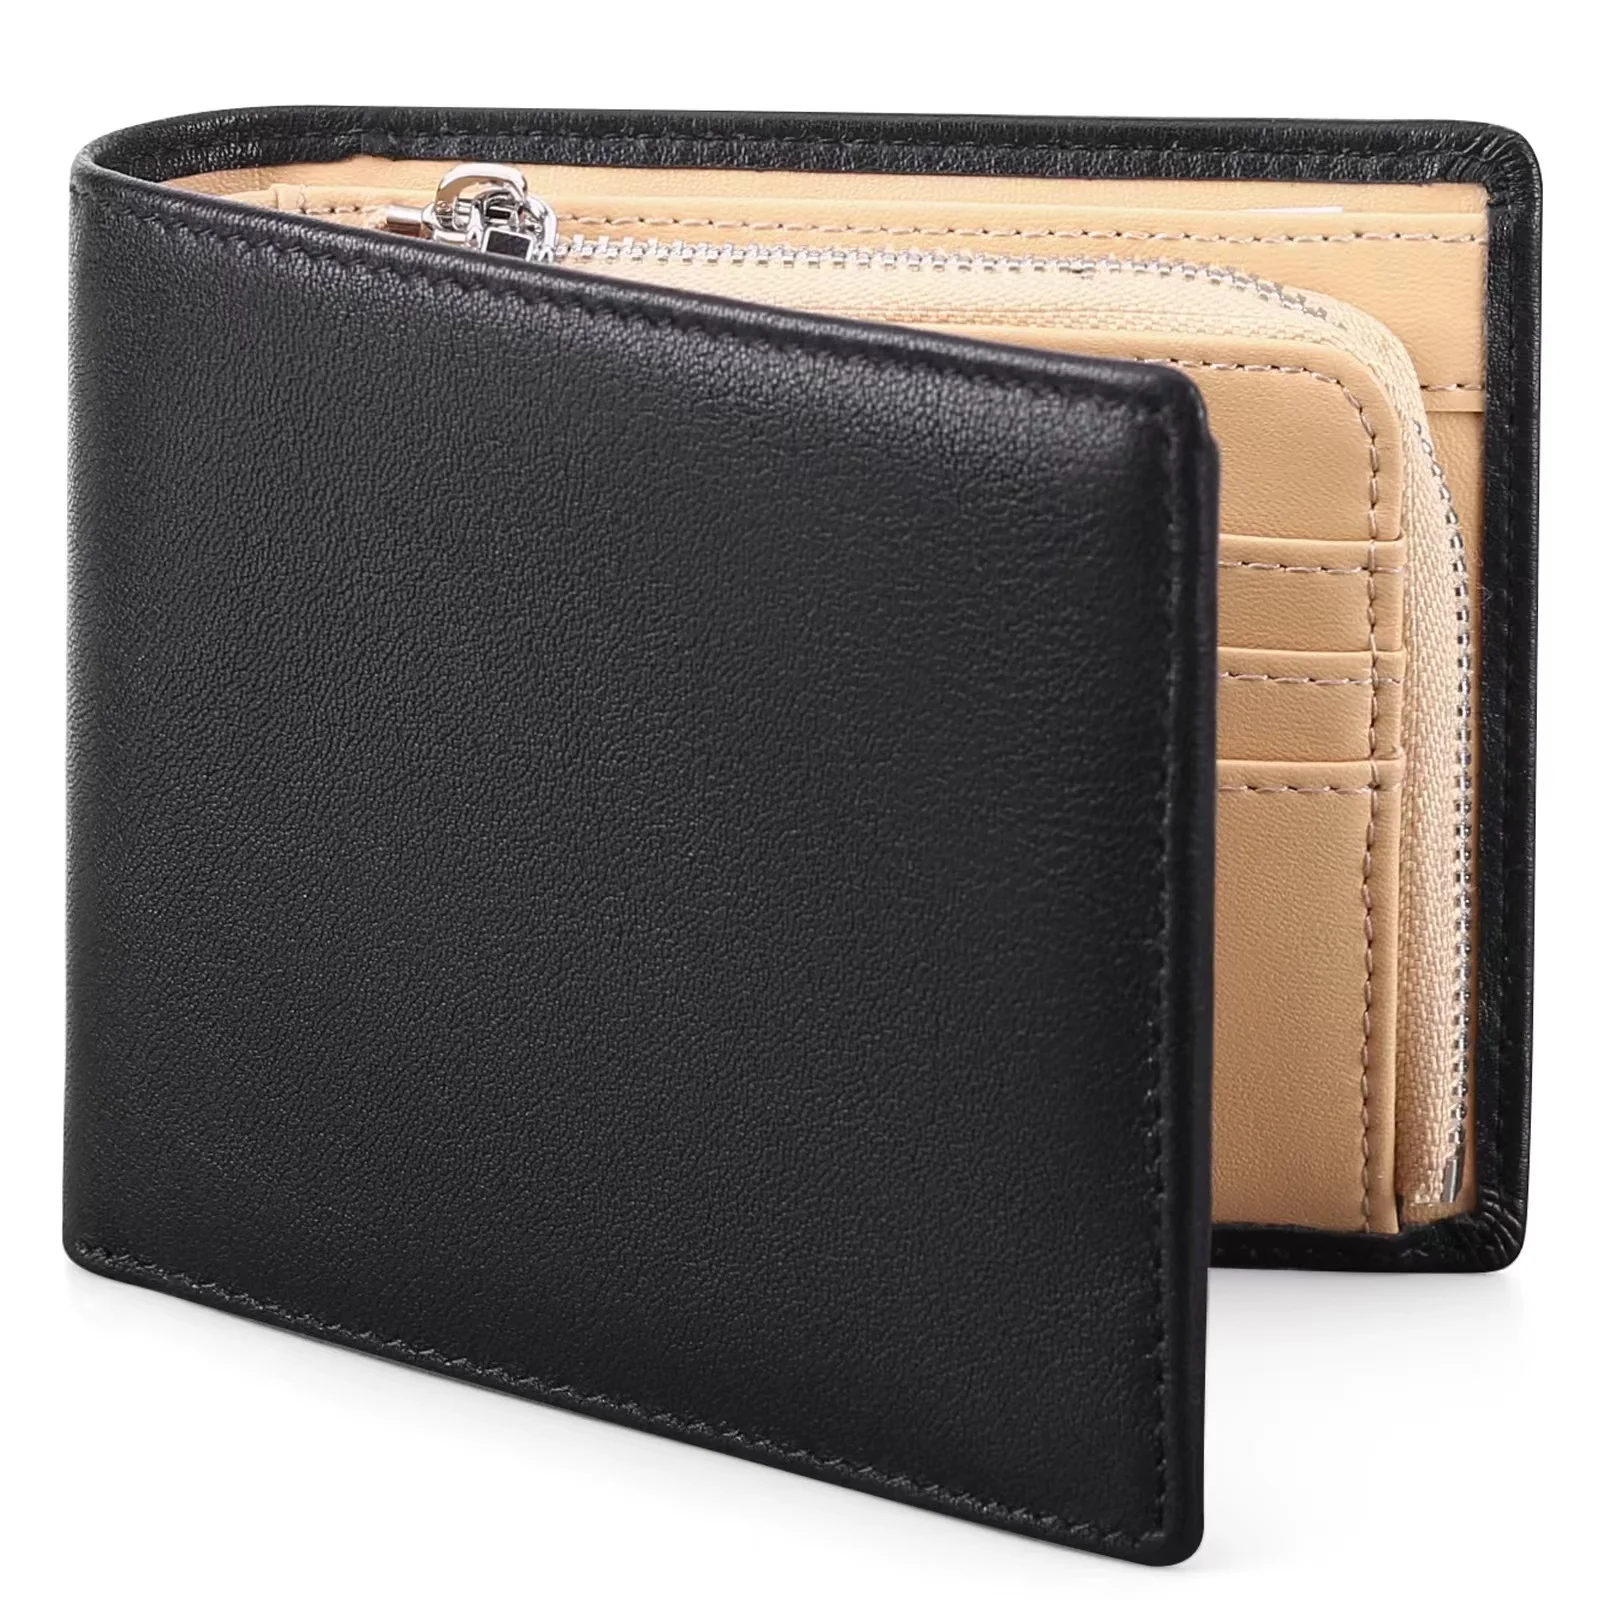 Men's Flat Folding Business Casual Universal Fashion Leather Large Capacity Wallet，A Good Choice For Gift Giving